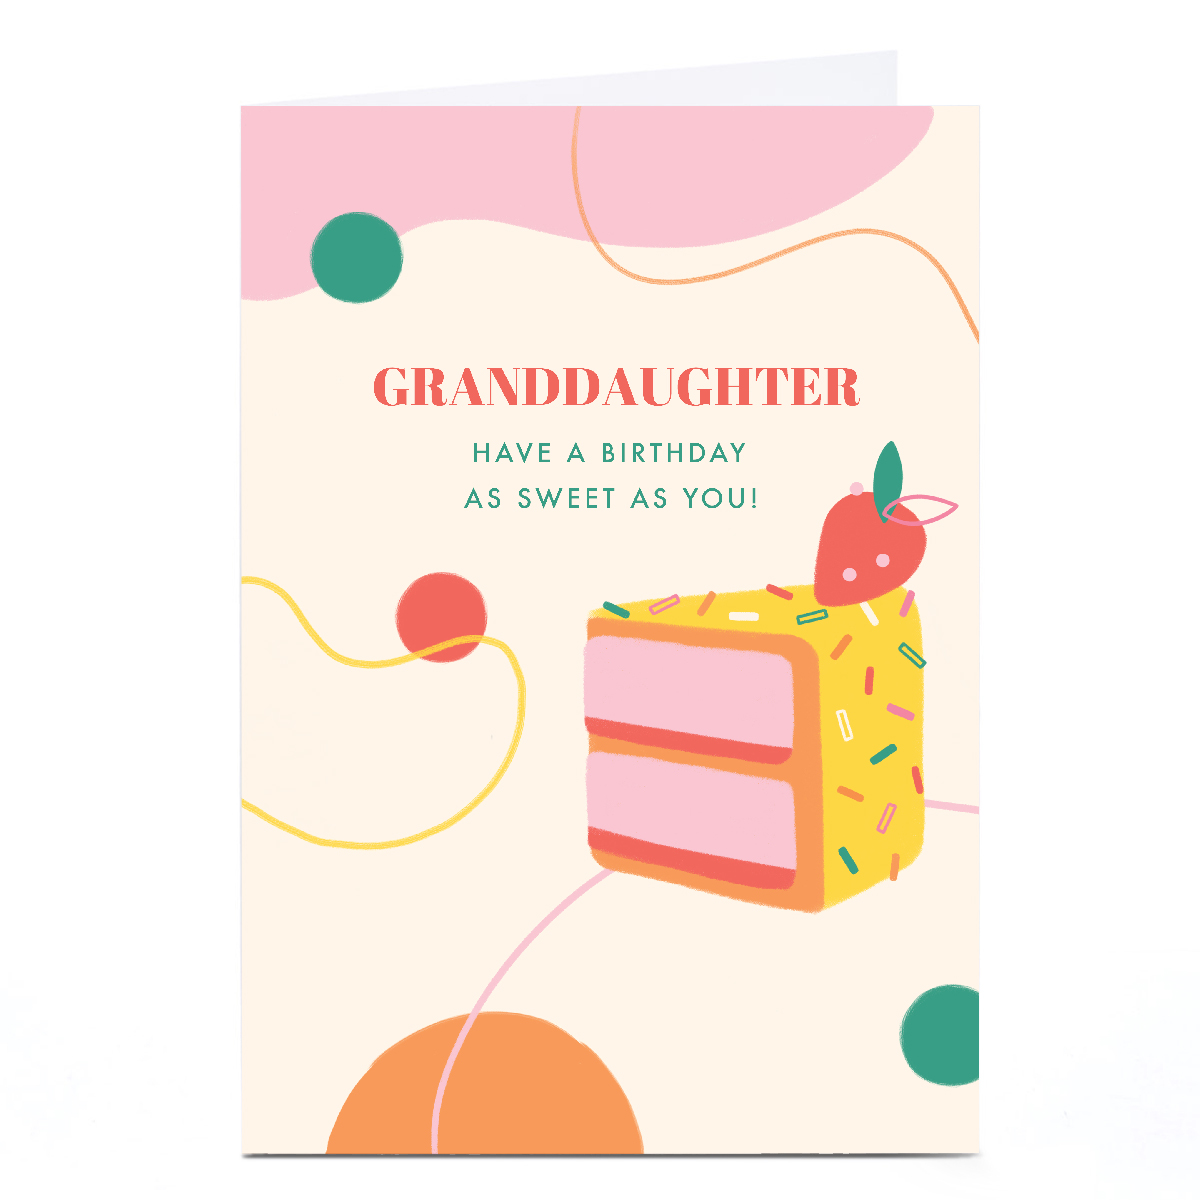 Personalised Birthday Card - Granddaughter have a birthday as sweet as you!